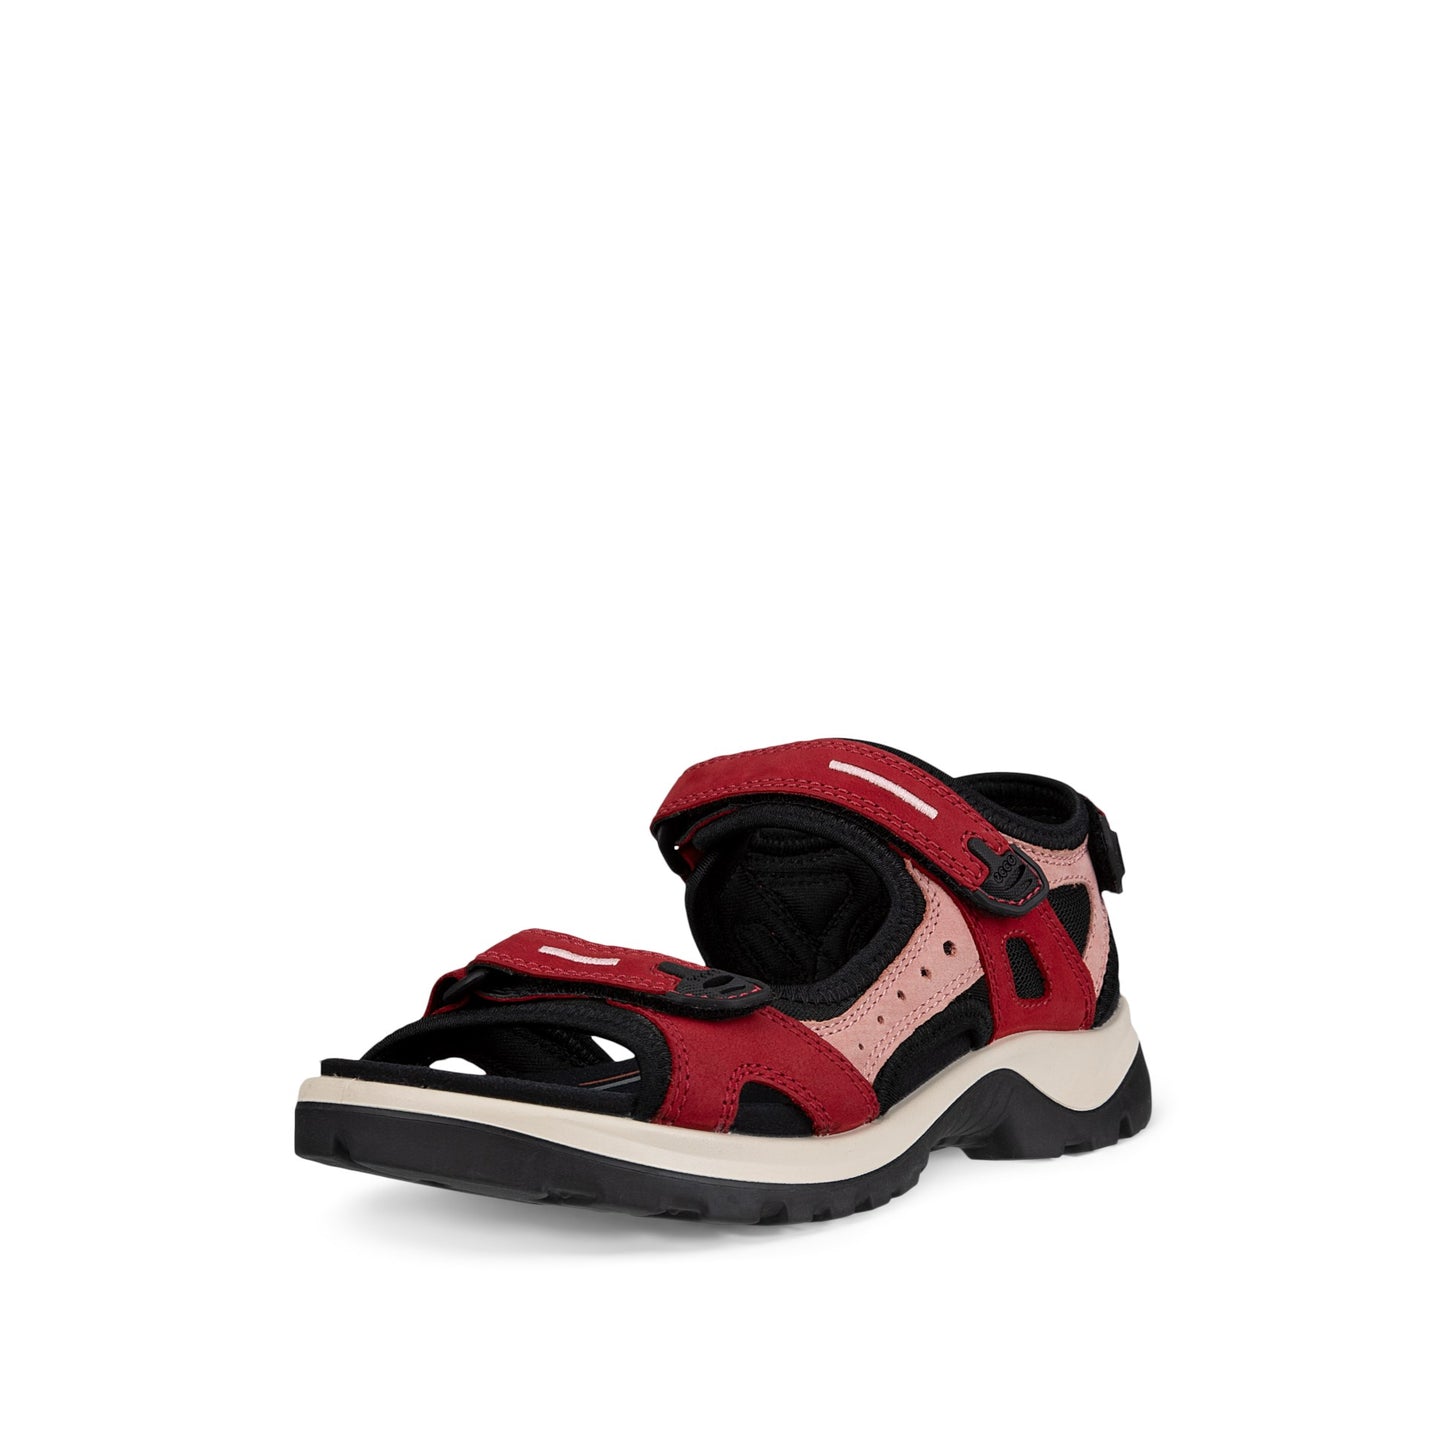 Ecco Ladies Off-Road 069563 - Chili Red/Damask Rose